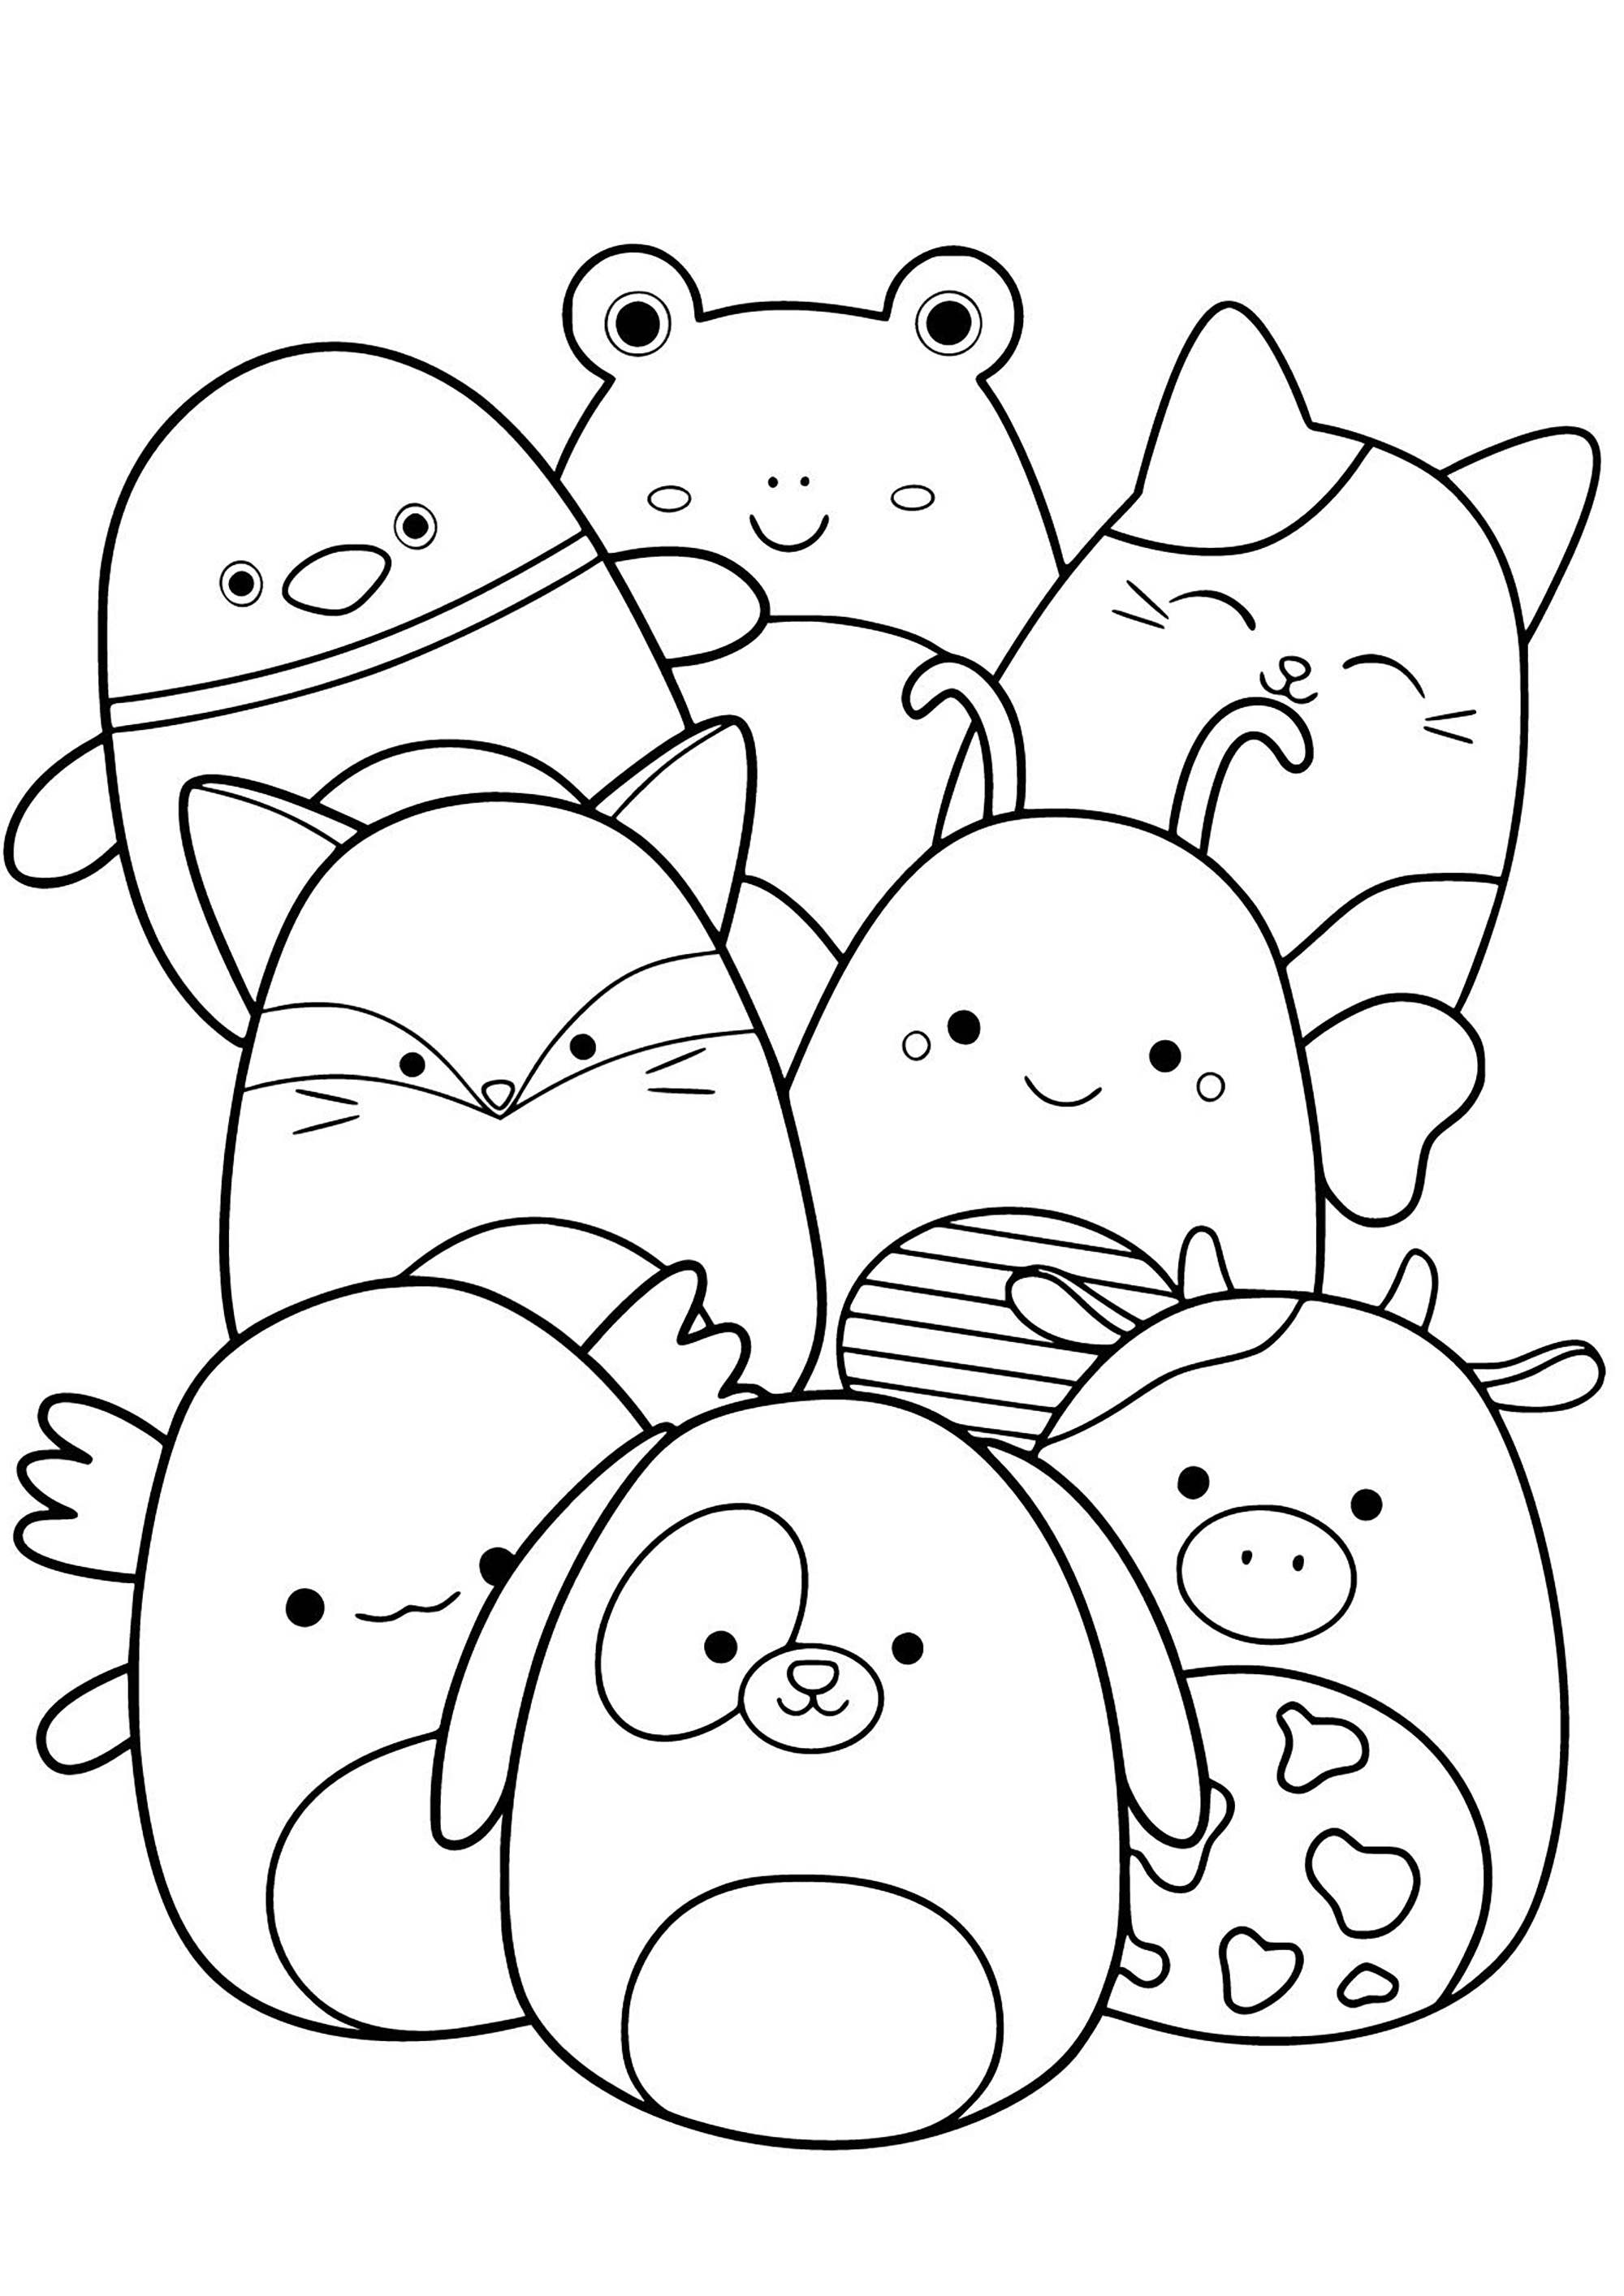 Squishmallow: some very cute characters